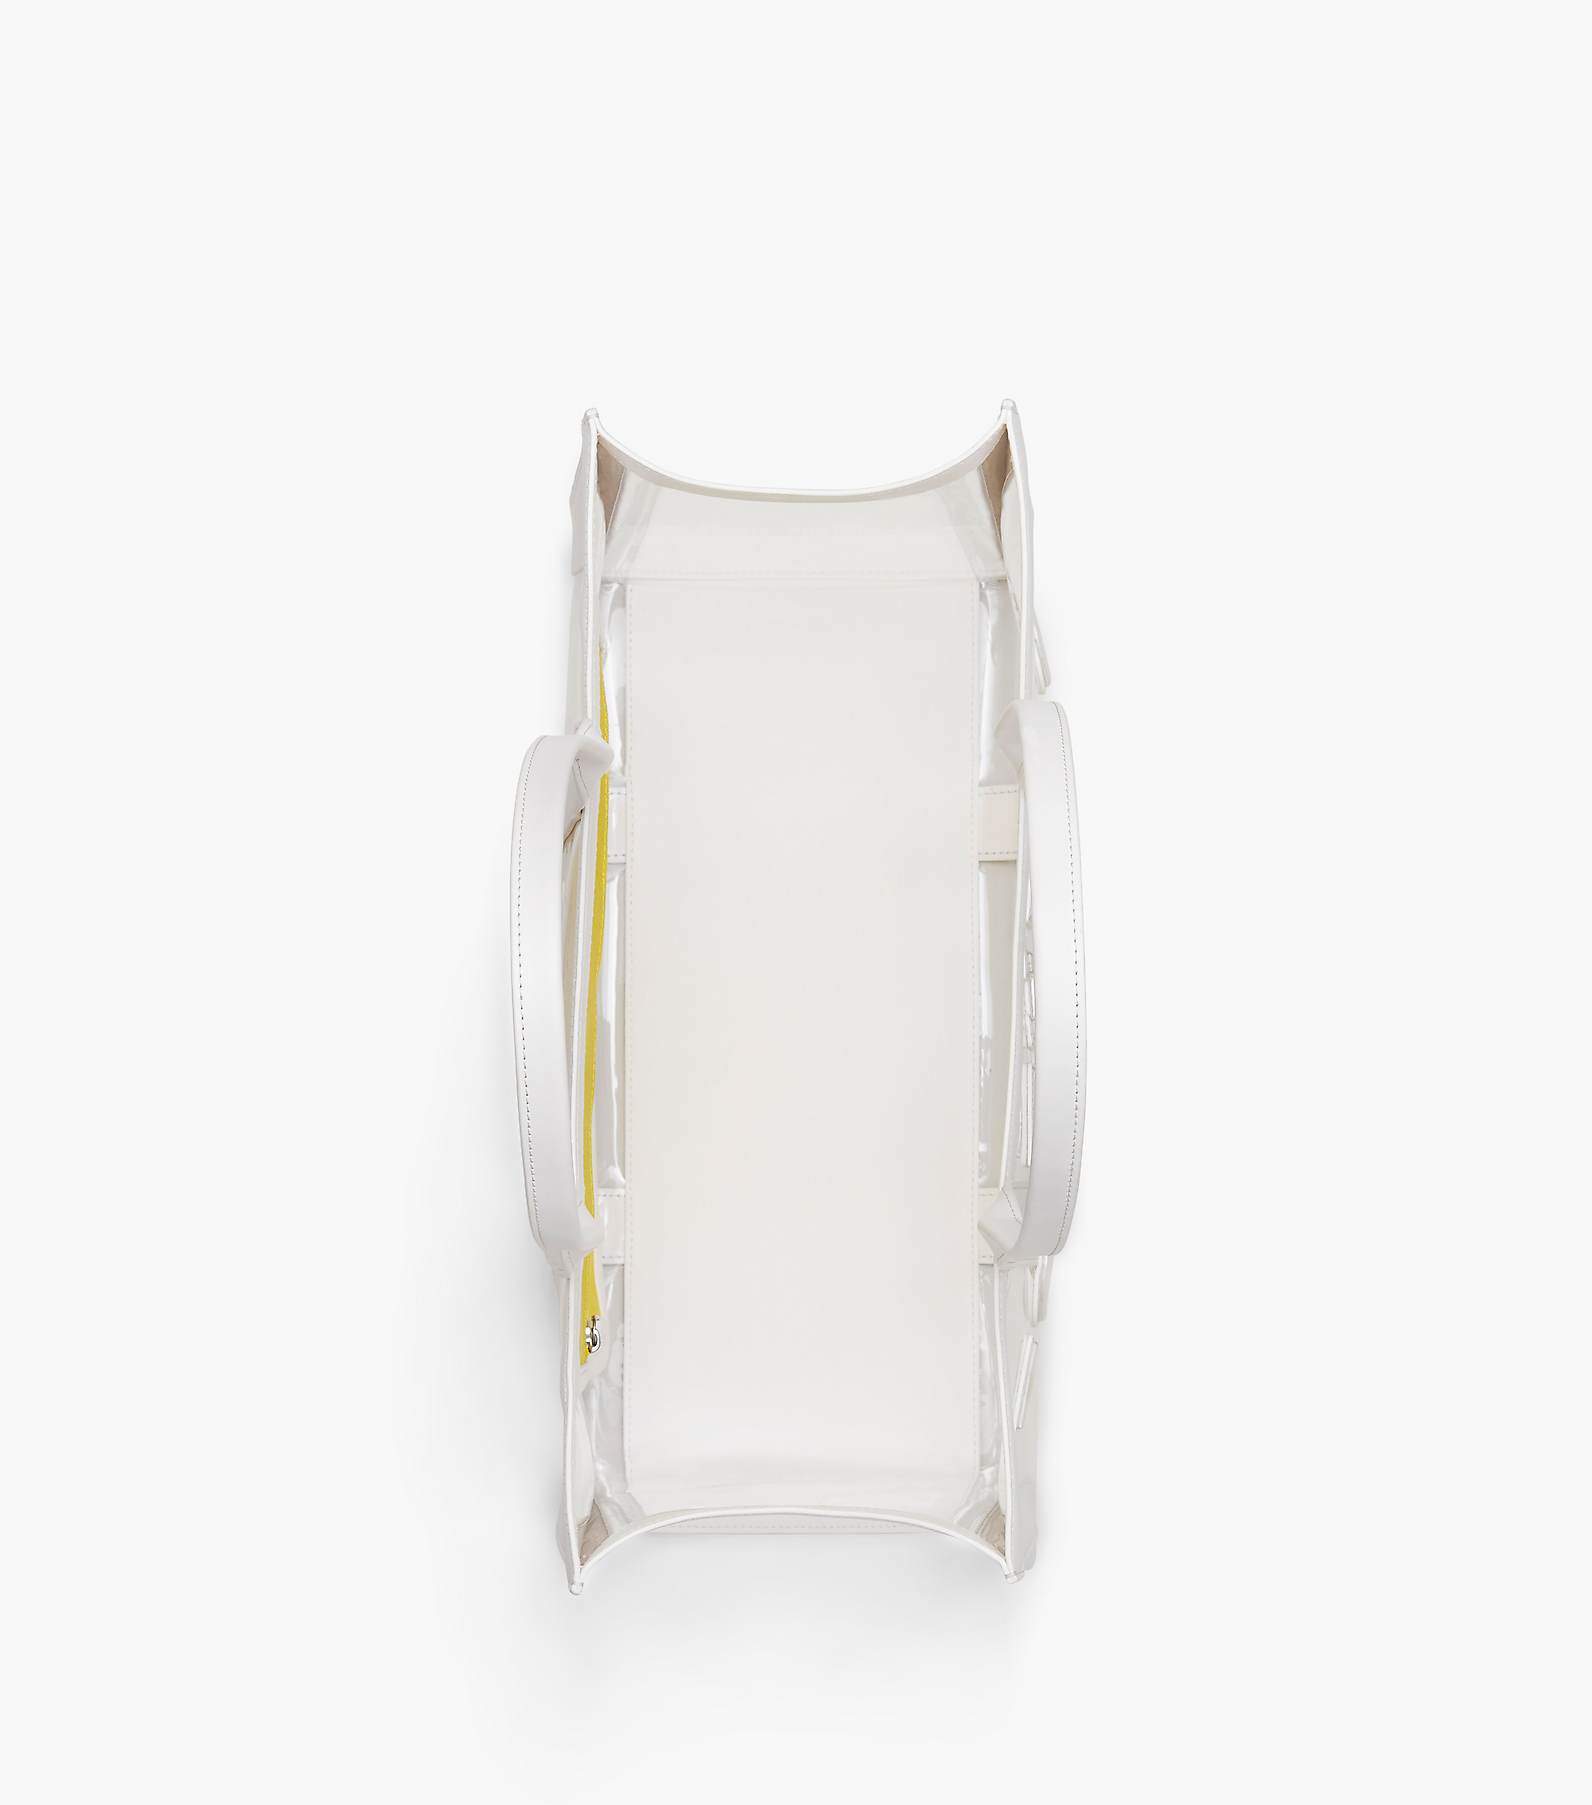 The Clear Large Tote Bag(null)